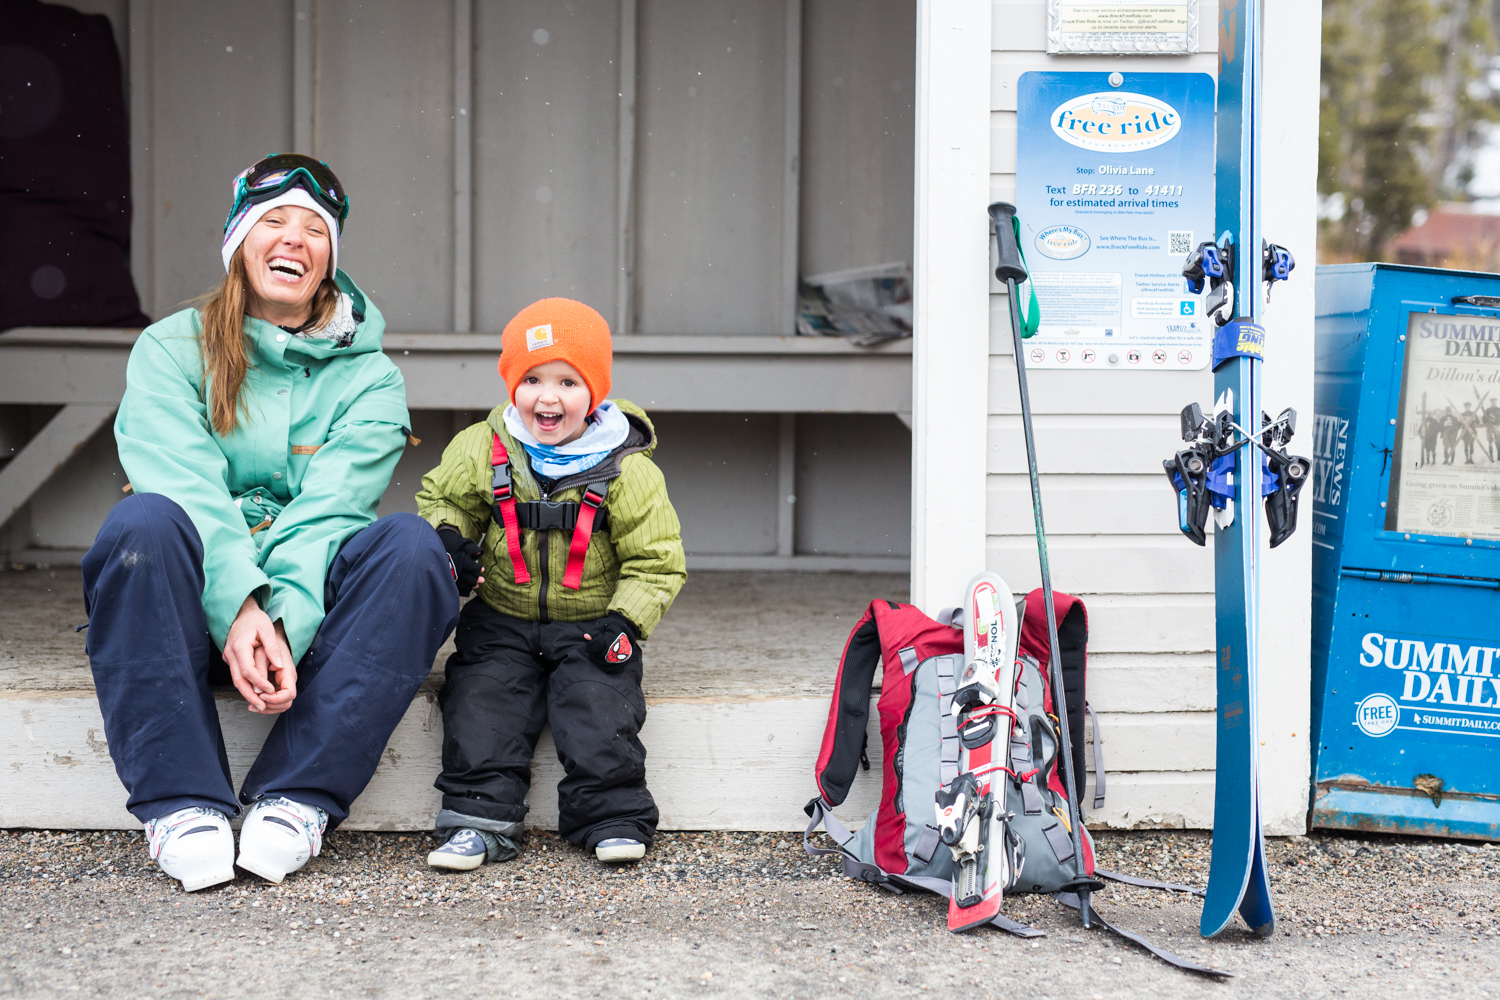 Parent and child smiling and sitting next to ski gear.